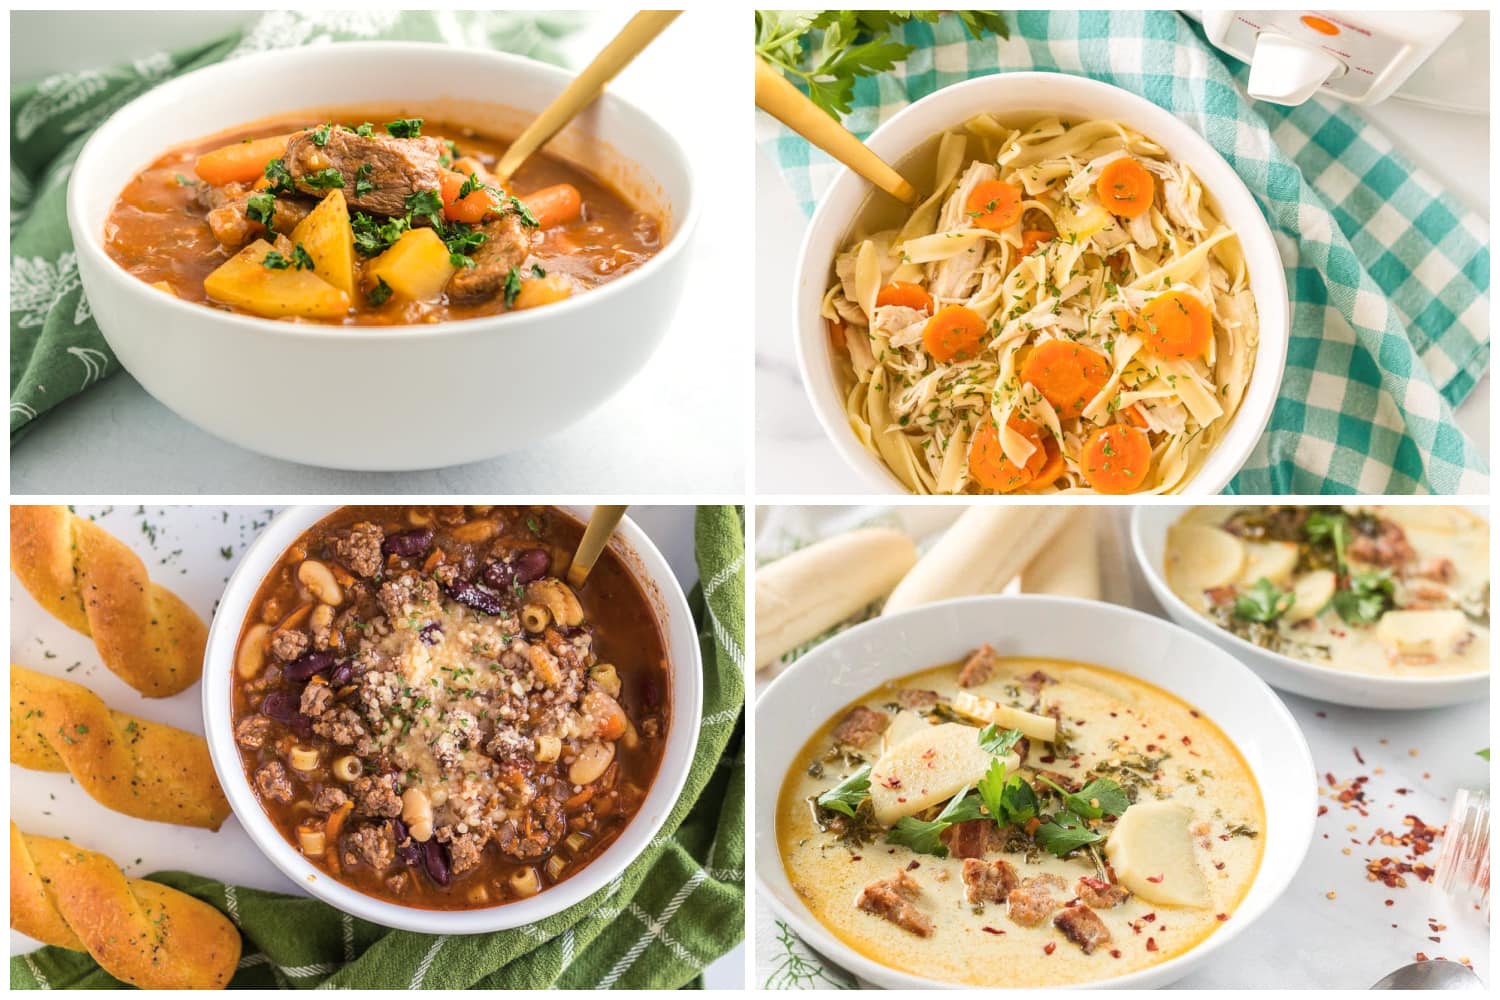 Wide collage of Crockpot Soups including beef stew, Zuppa Toscana,Pasta e Fagioli, and chicken noodle.